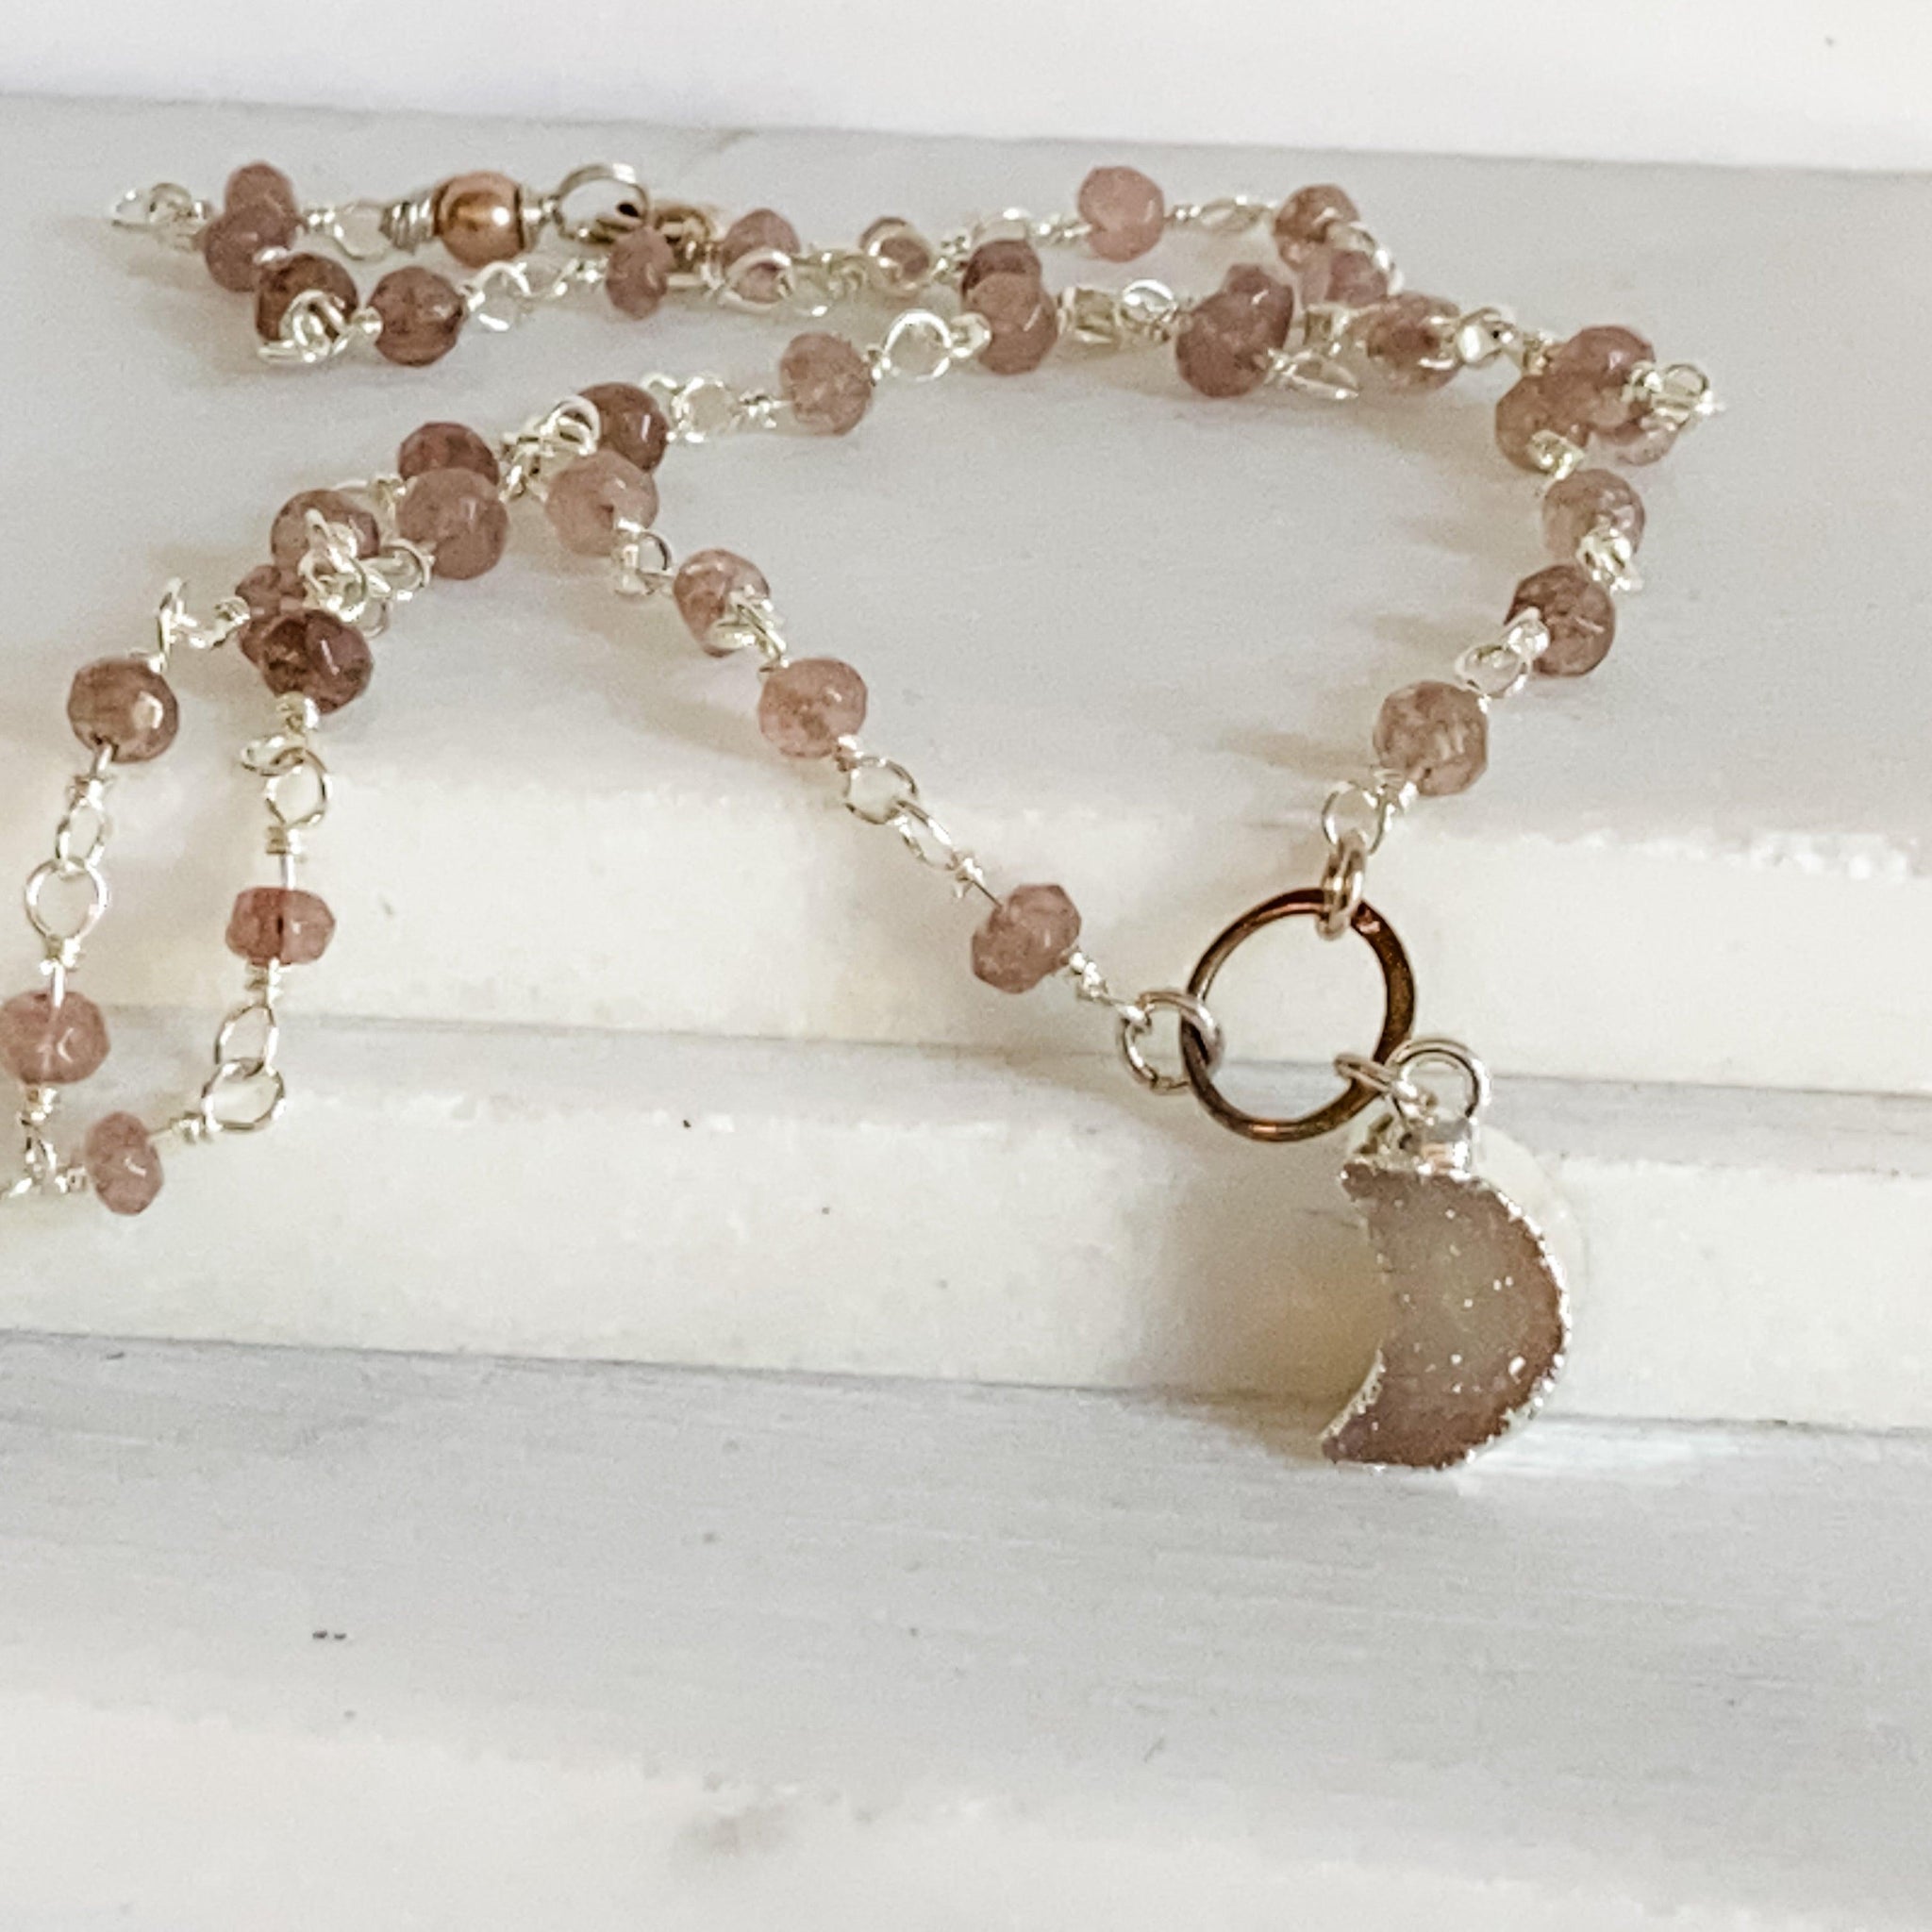 Druzy Quartz Mini Moon and Chocolate Moonstone with Sterling Silver Circlet Necklace Uni-T Necklace